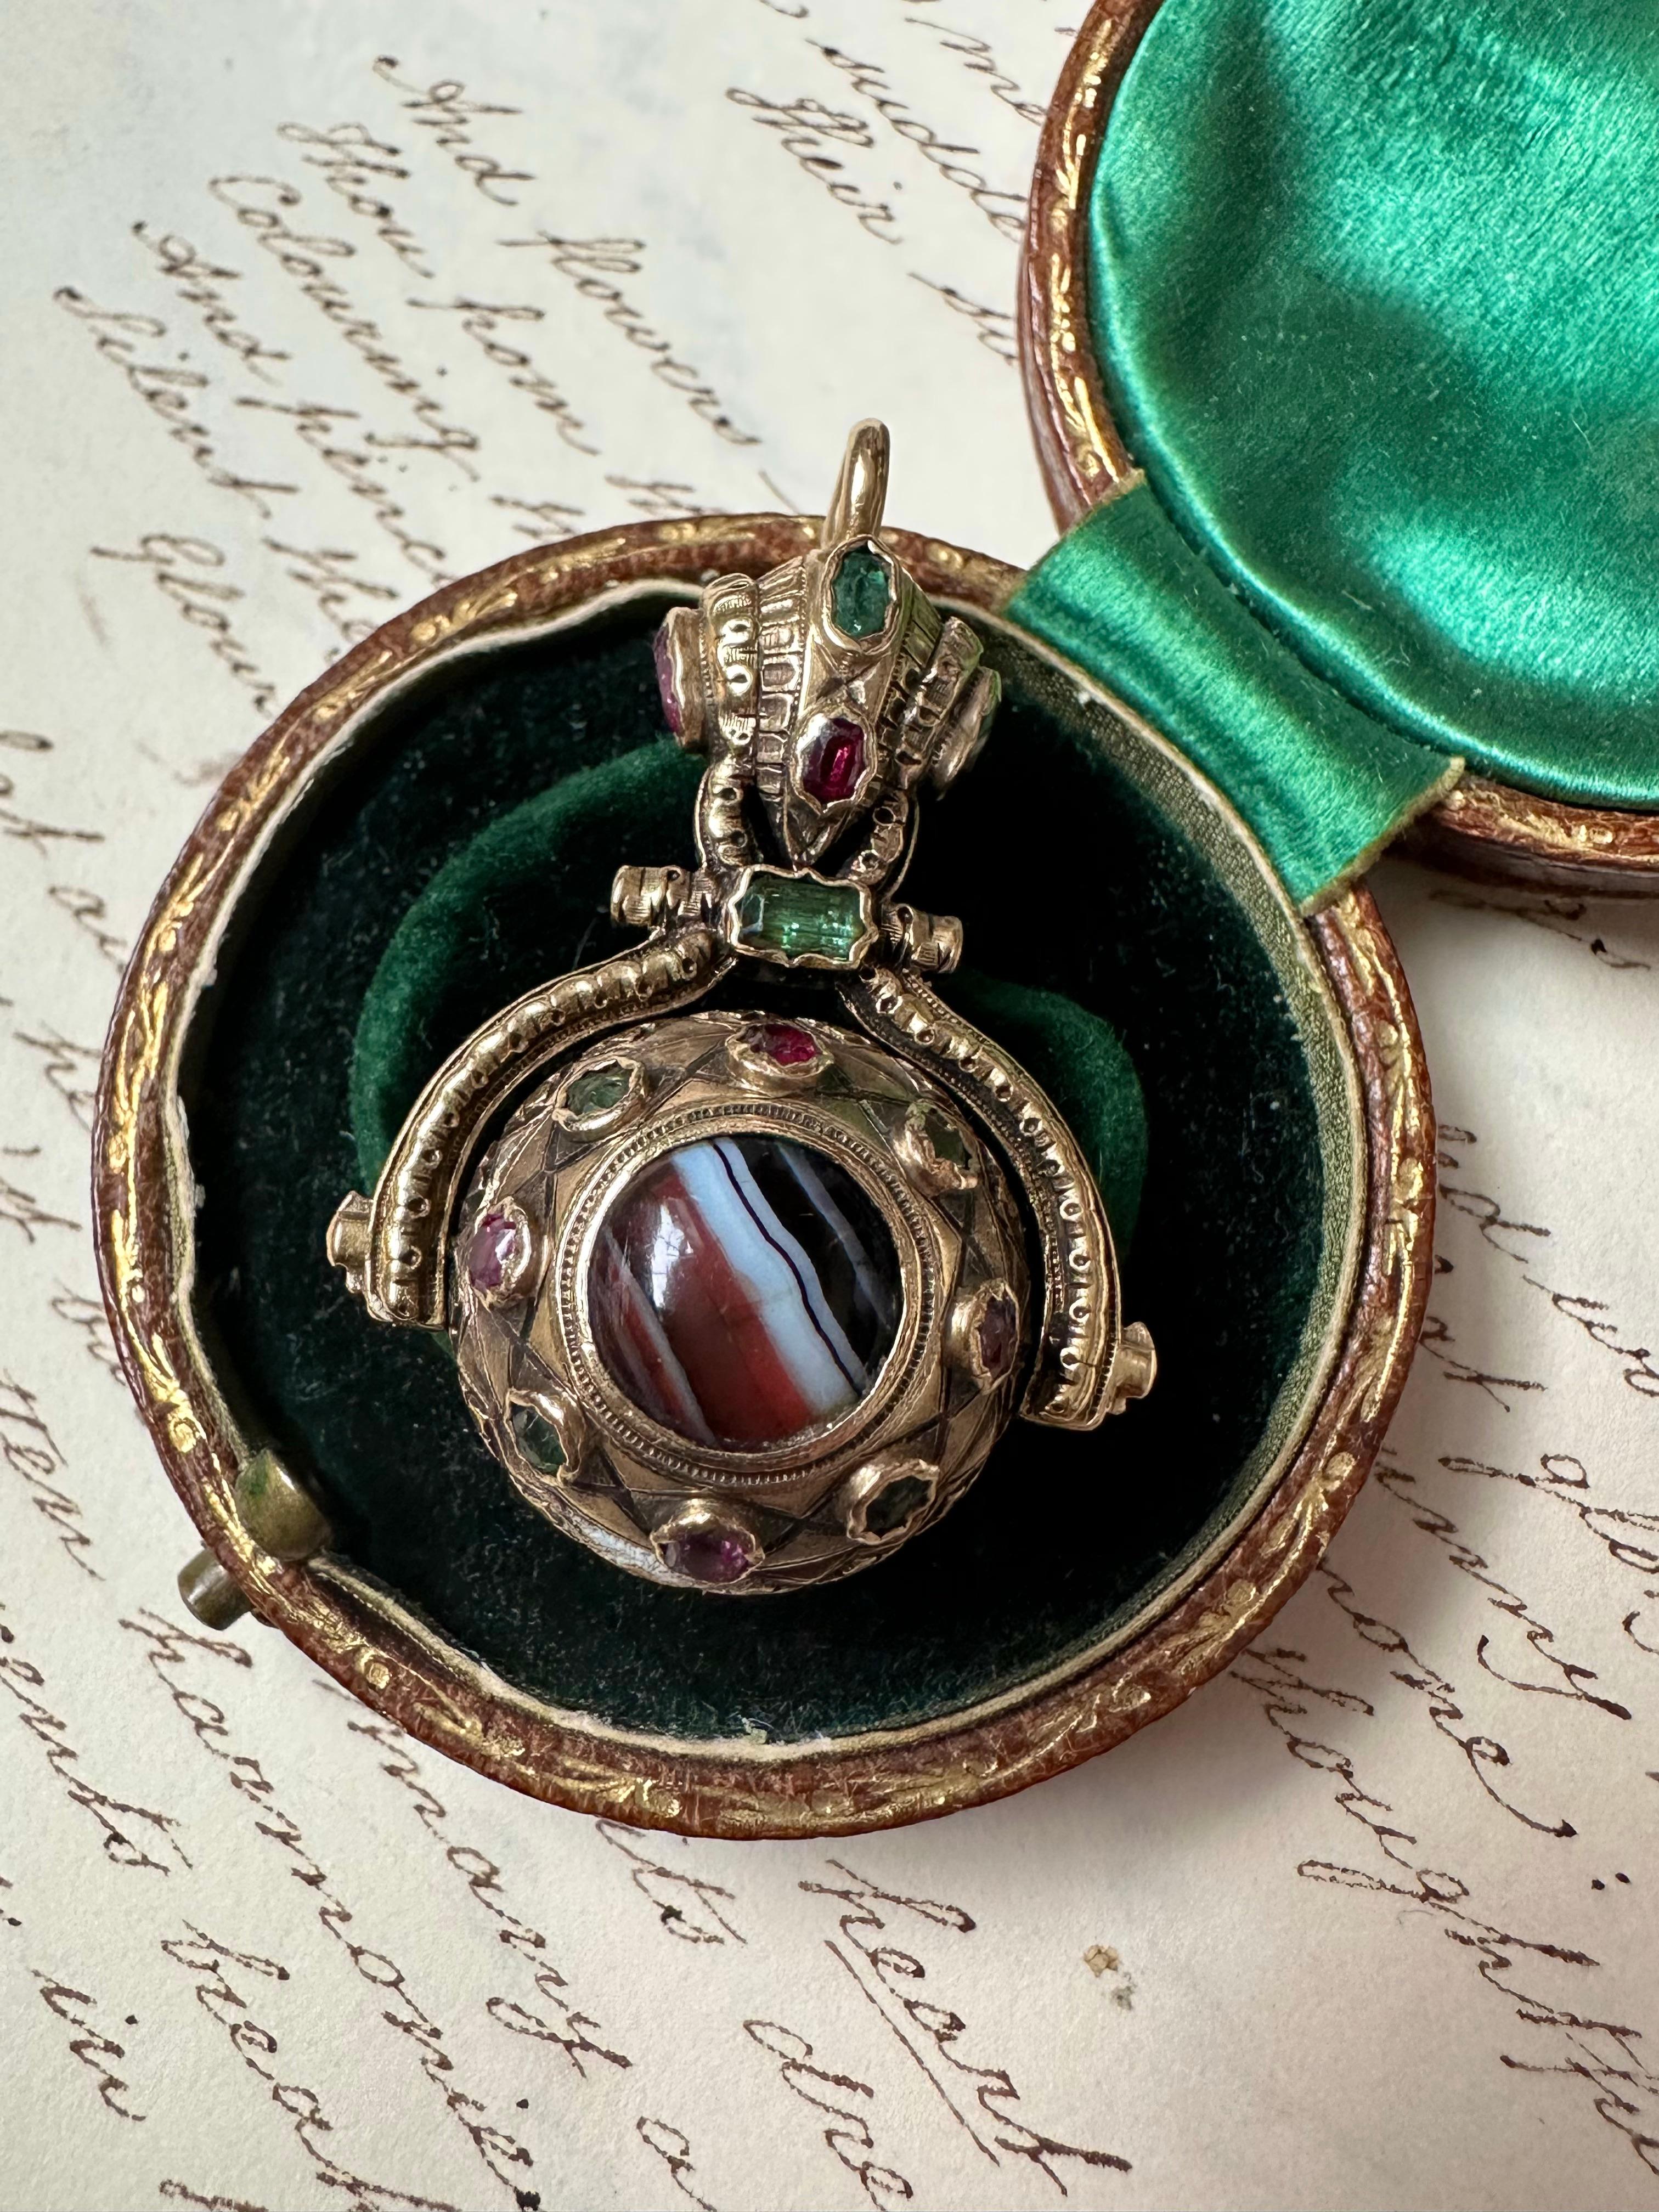 Dating to the early to mid 19th century, this substantial double sided watch fob is a rare and wonderful jewel. One side of the pendant glows with a pastel foil-backed amethyst, the other banded agate adorned all around by gemmy emeralds and vibrant